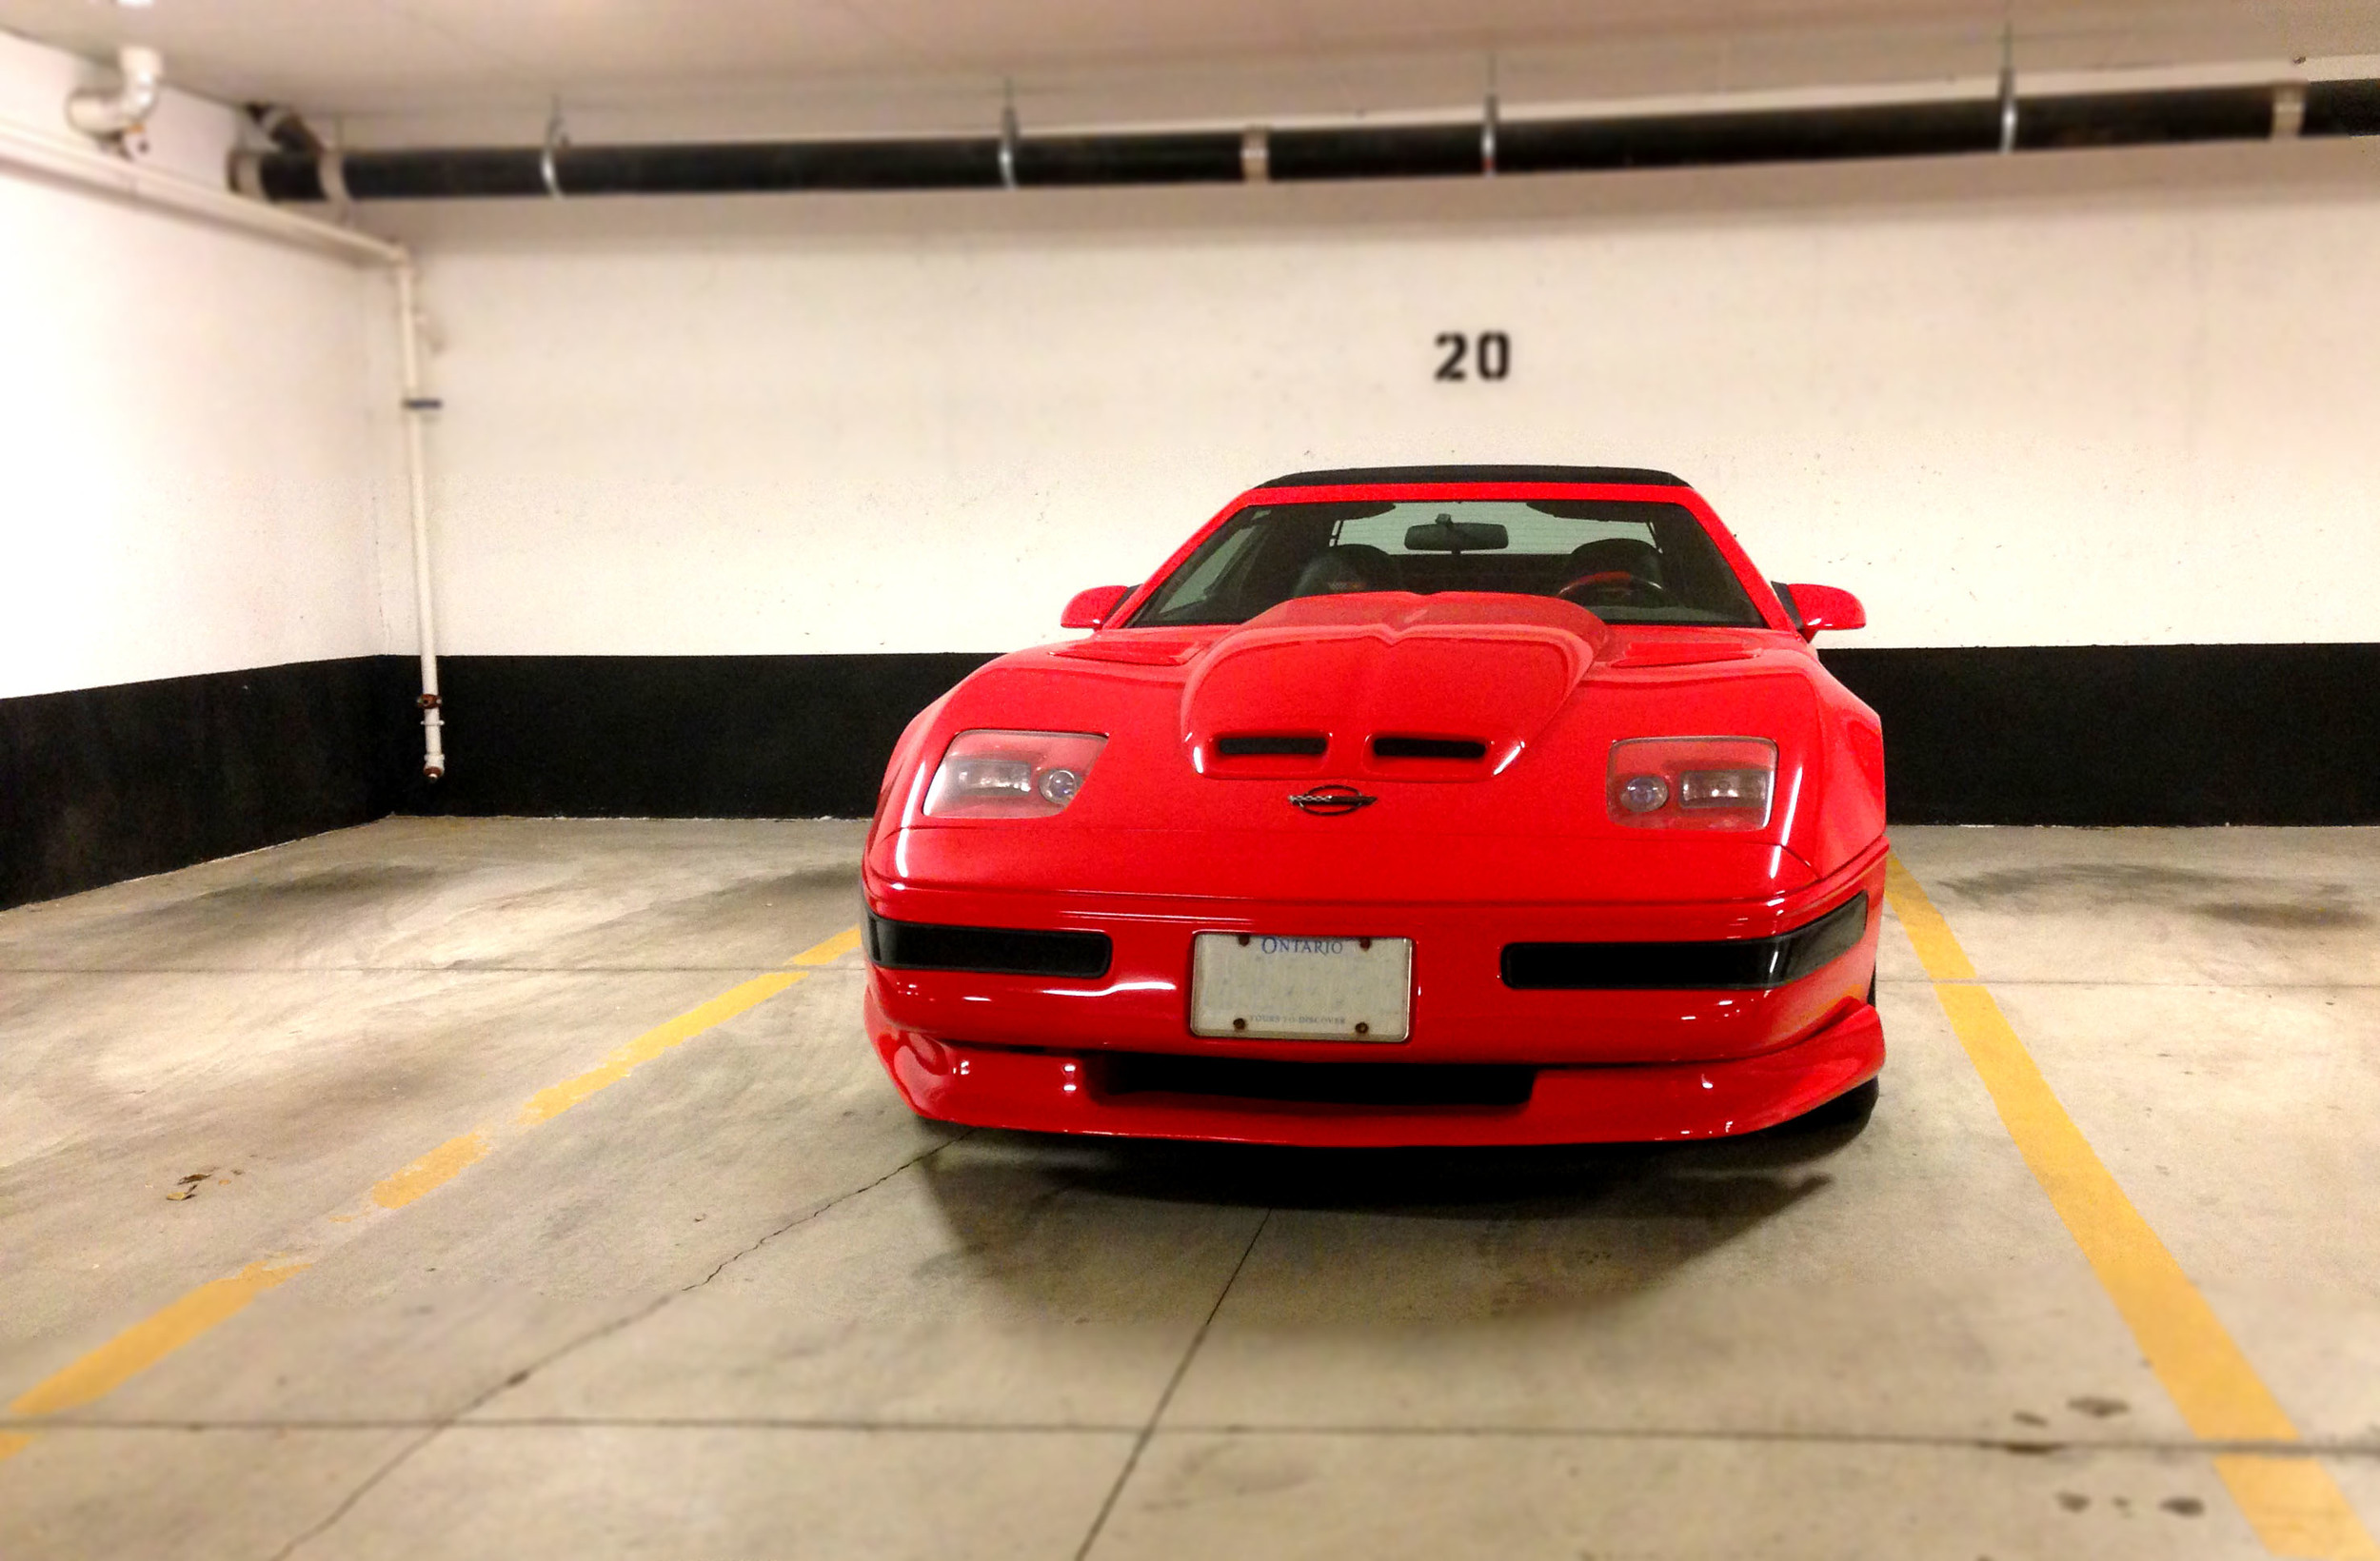 A very highly "customized" C4 Corvette